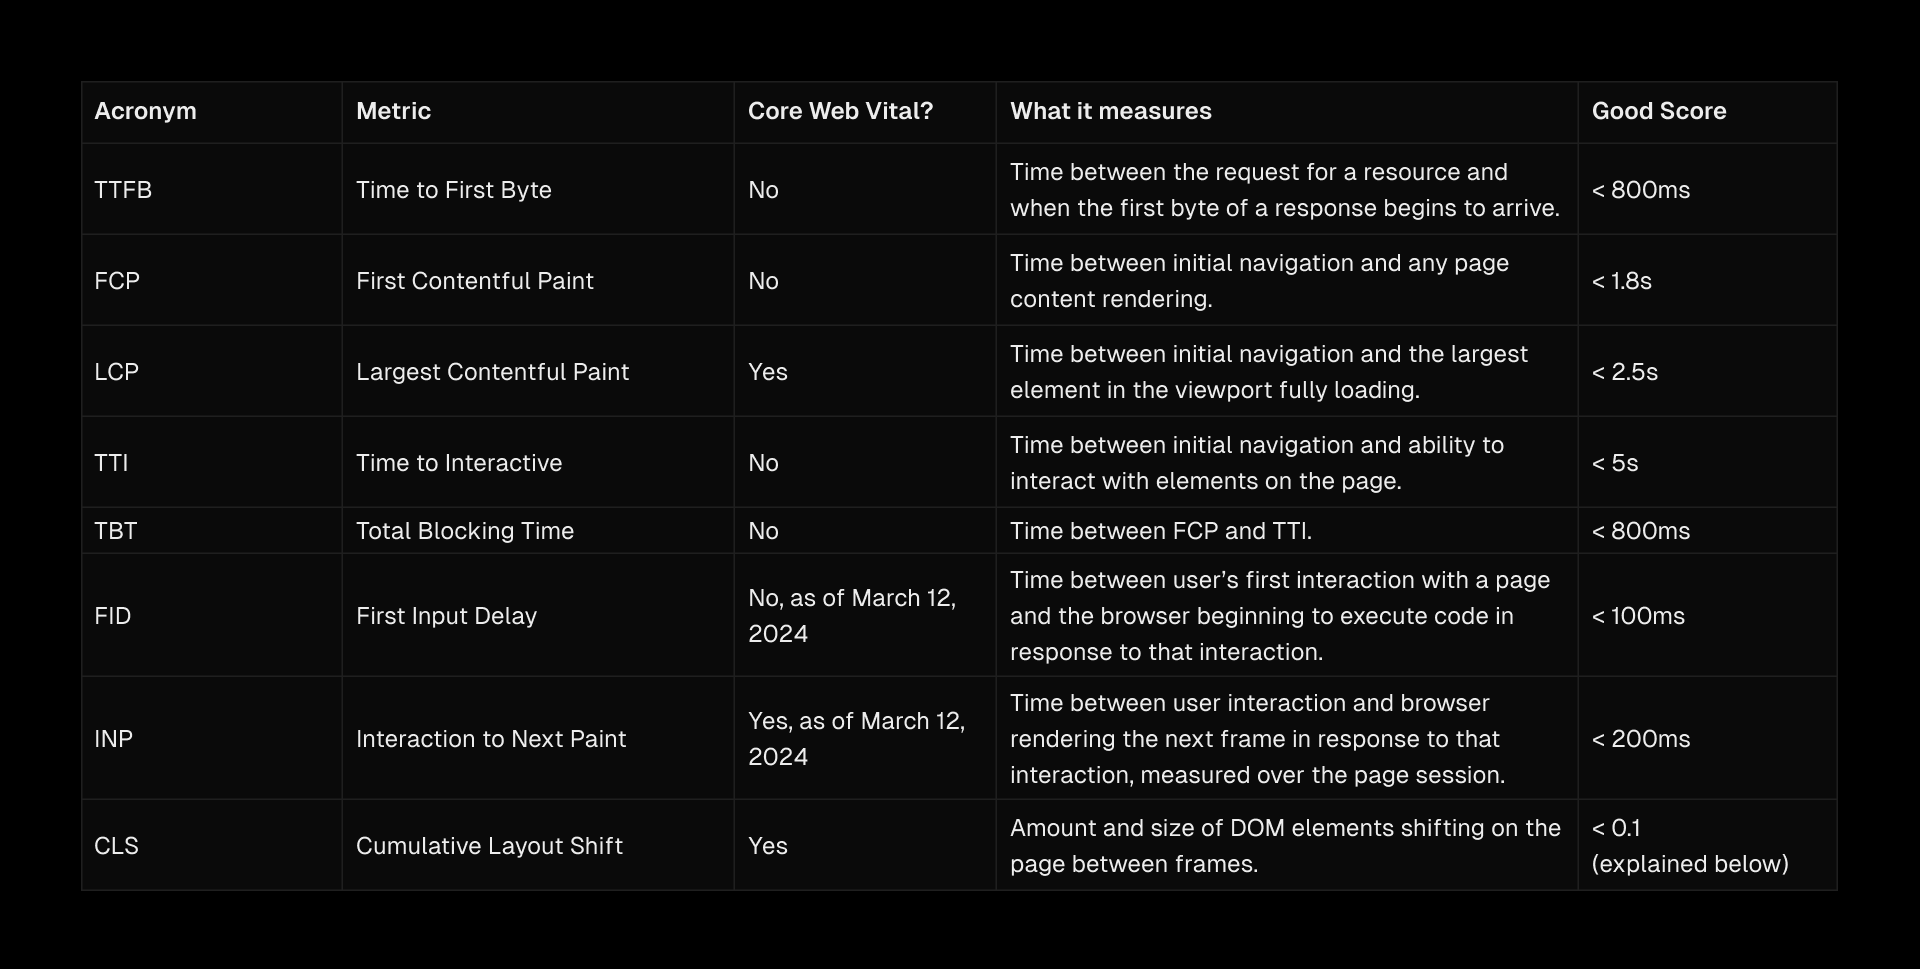 The Core Web Vitals and their related metrics.